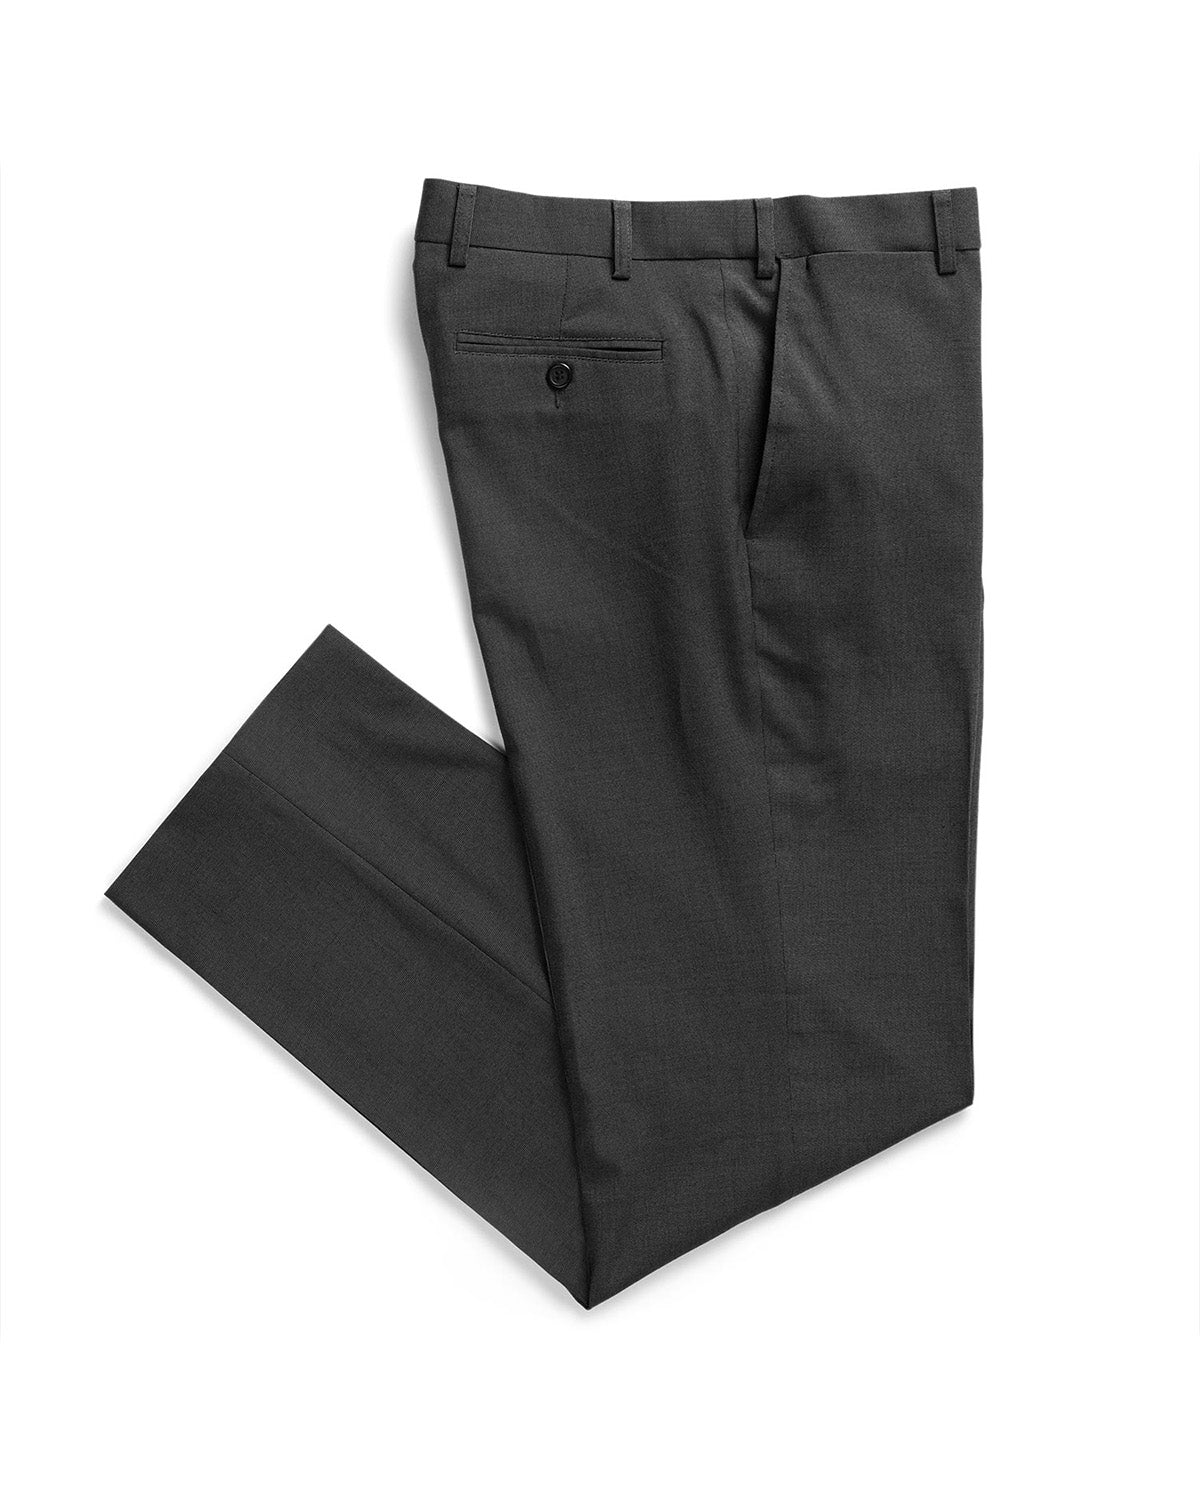 Mens Elliot Washable Pant - Uniforms and Workwear NZ - Ticketwearconz